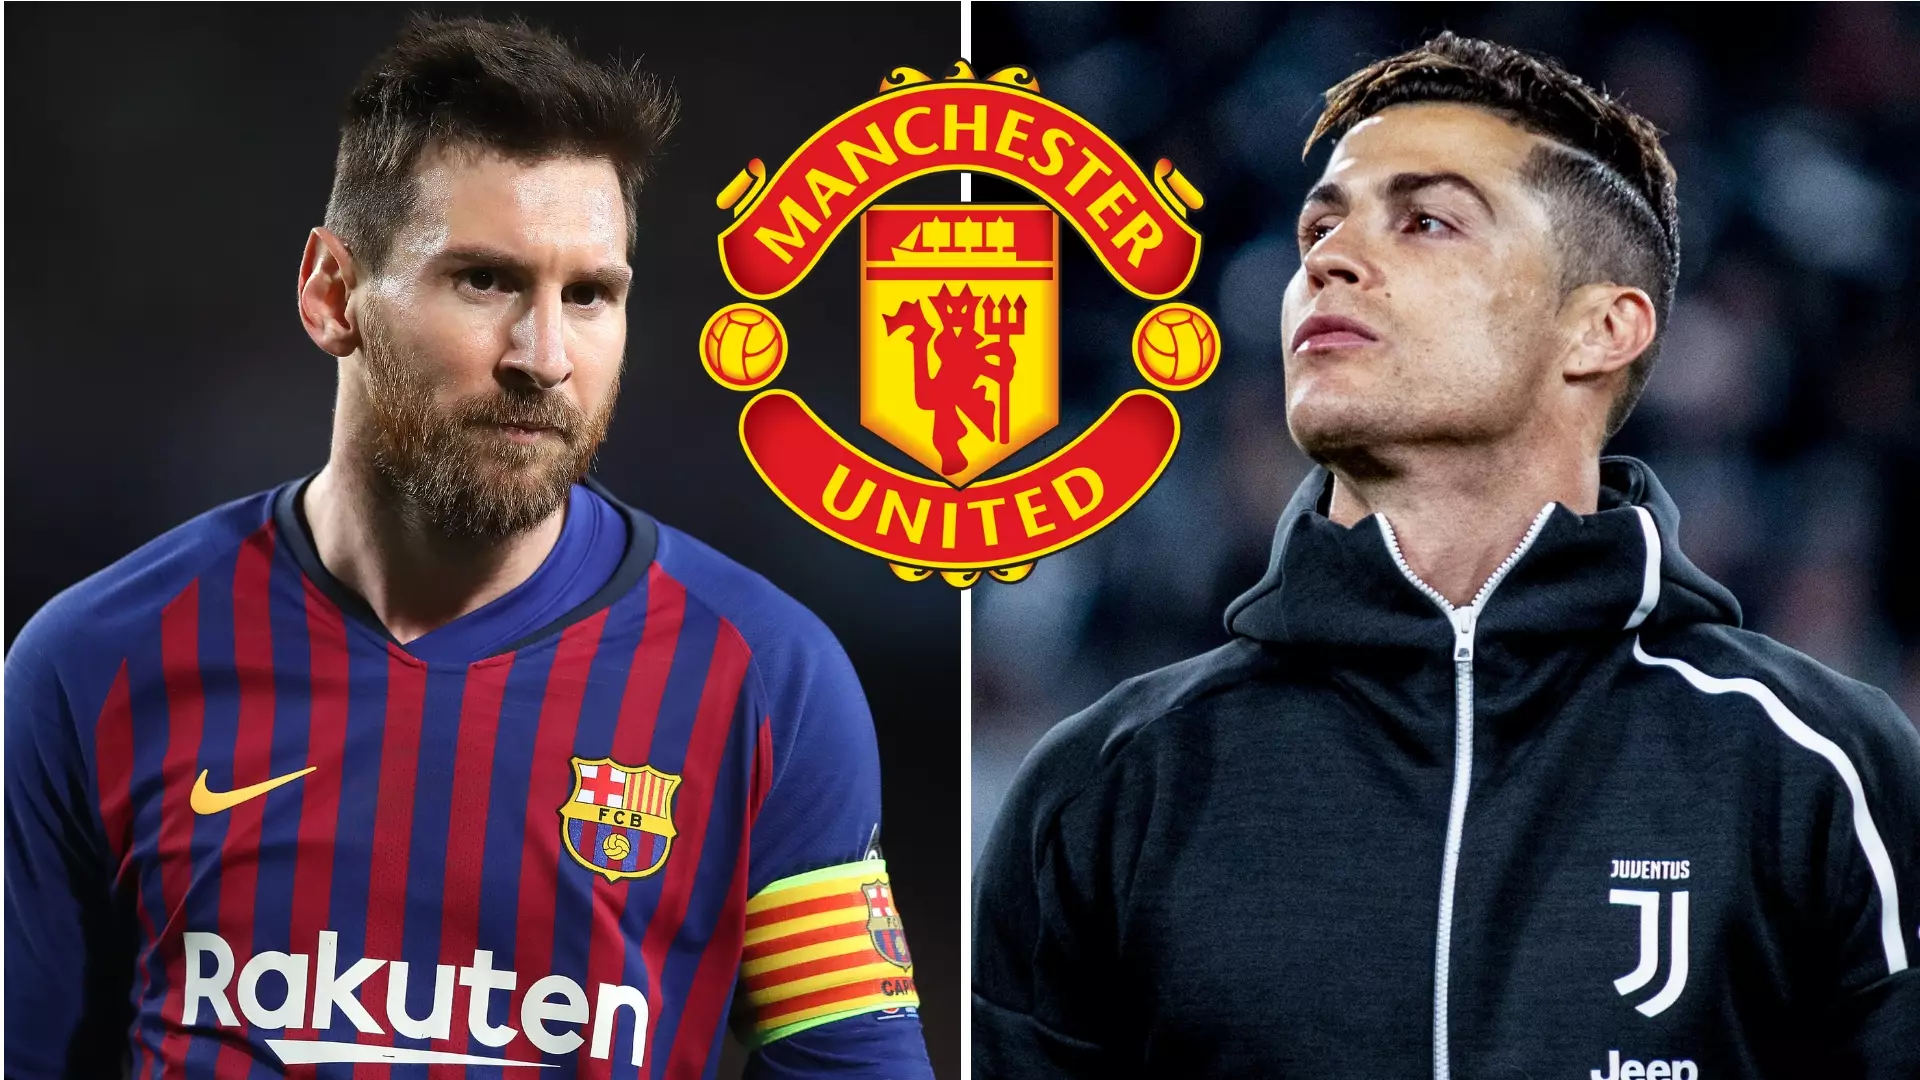 Lionel Messi Or Cristiano Ronaldo Wouldn't Solve Manchester United's Problems, Says Wayne Rooney